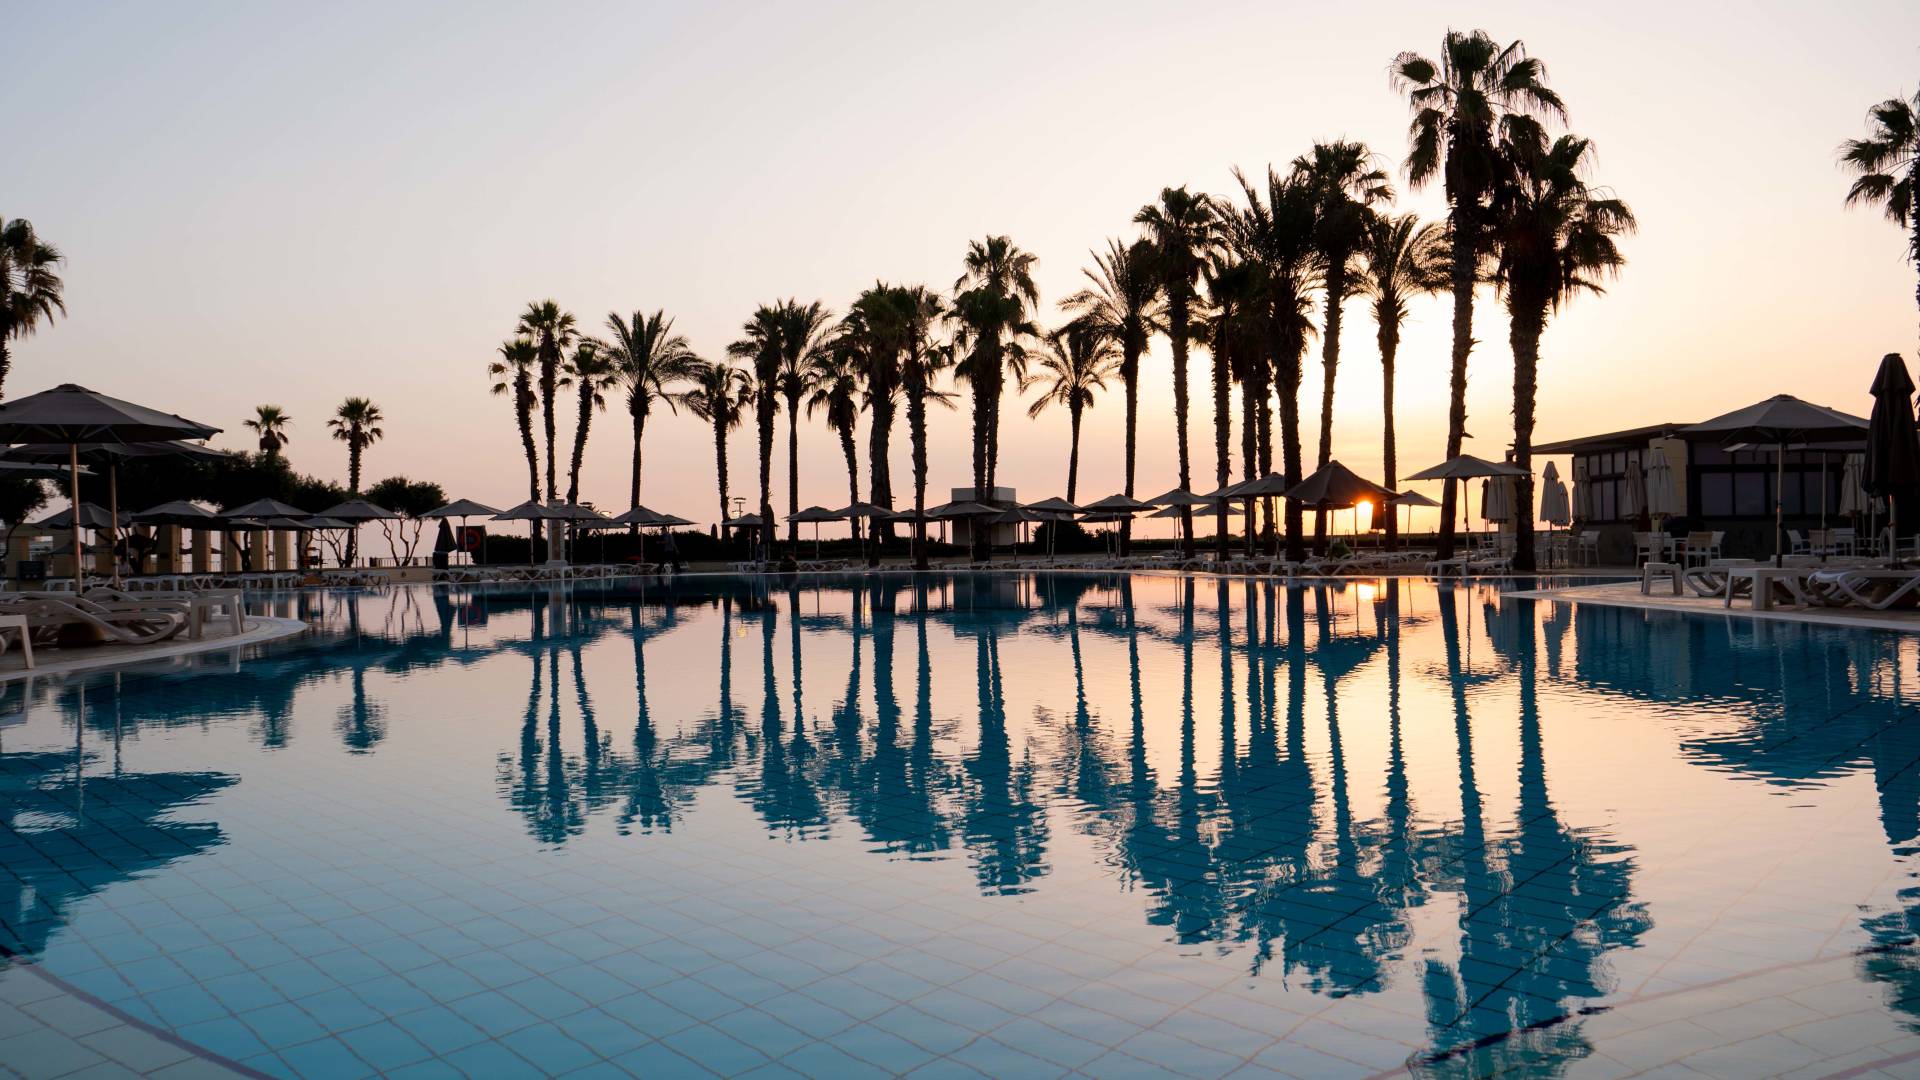 Outdoor pool, sunset with palm trees